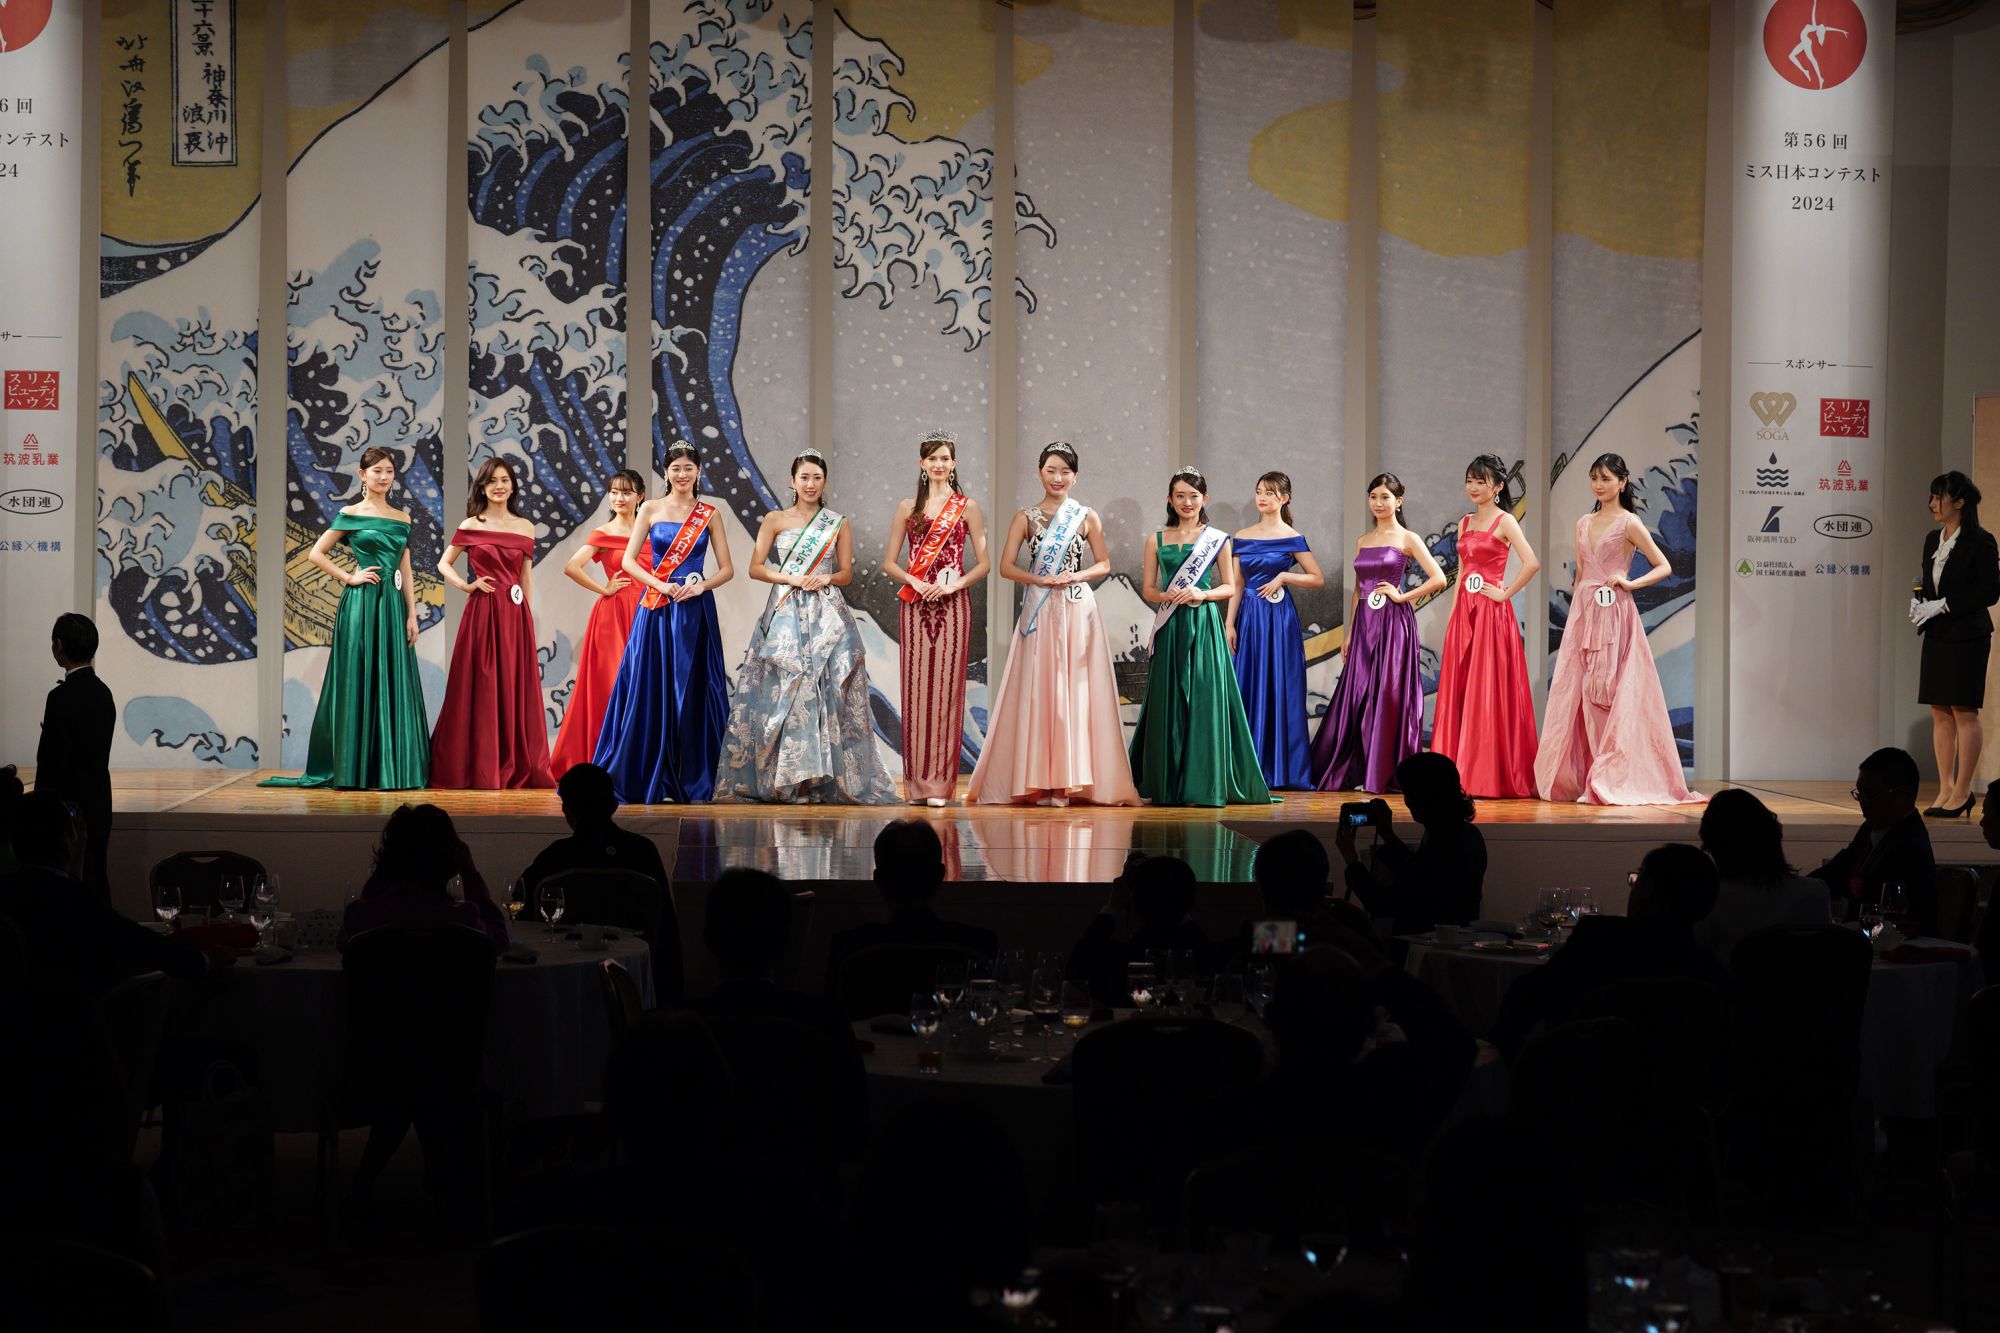 Miss Nippon contestants at the beauty pageant final.